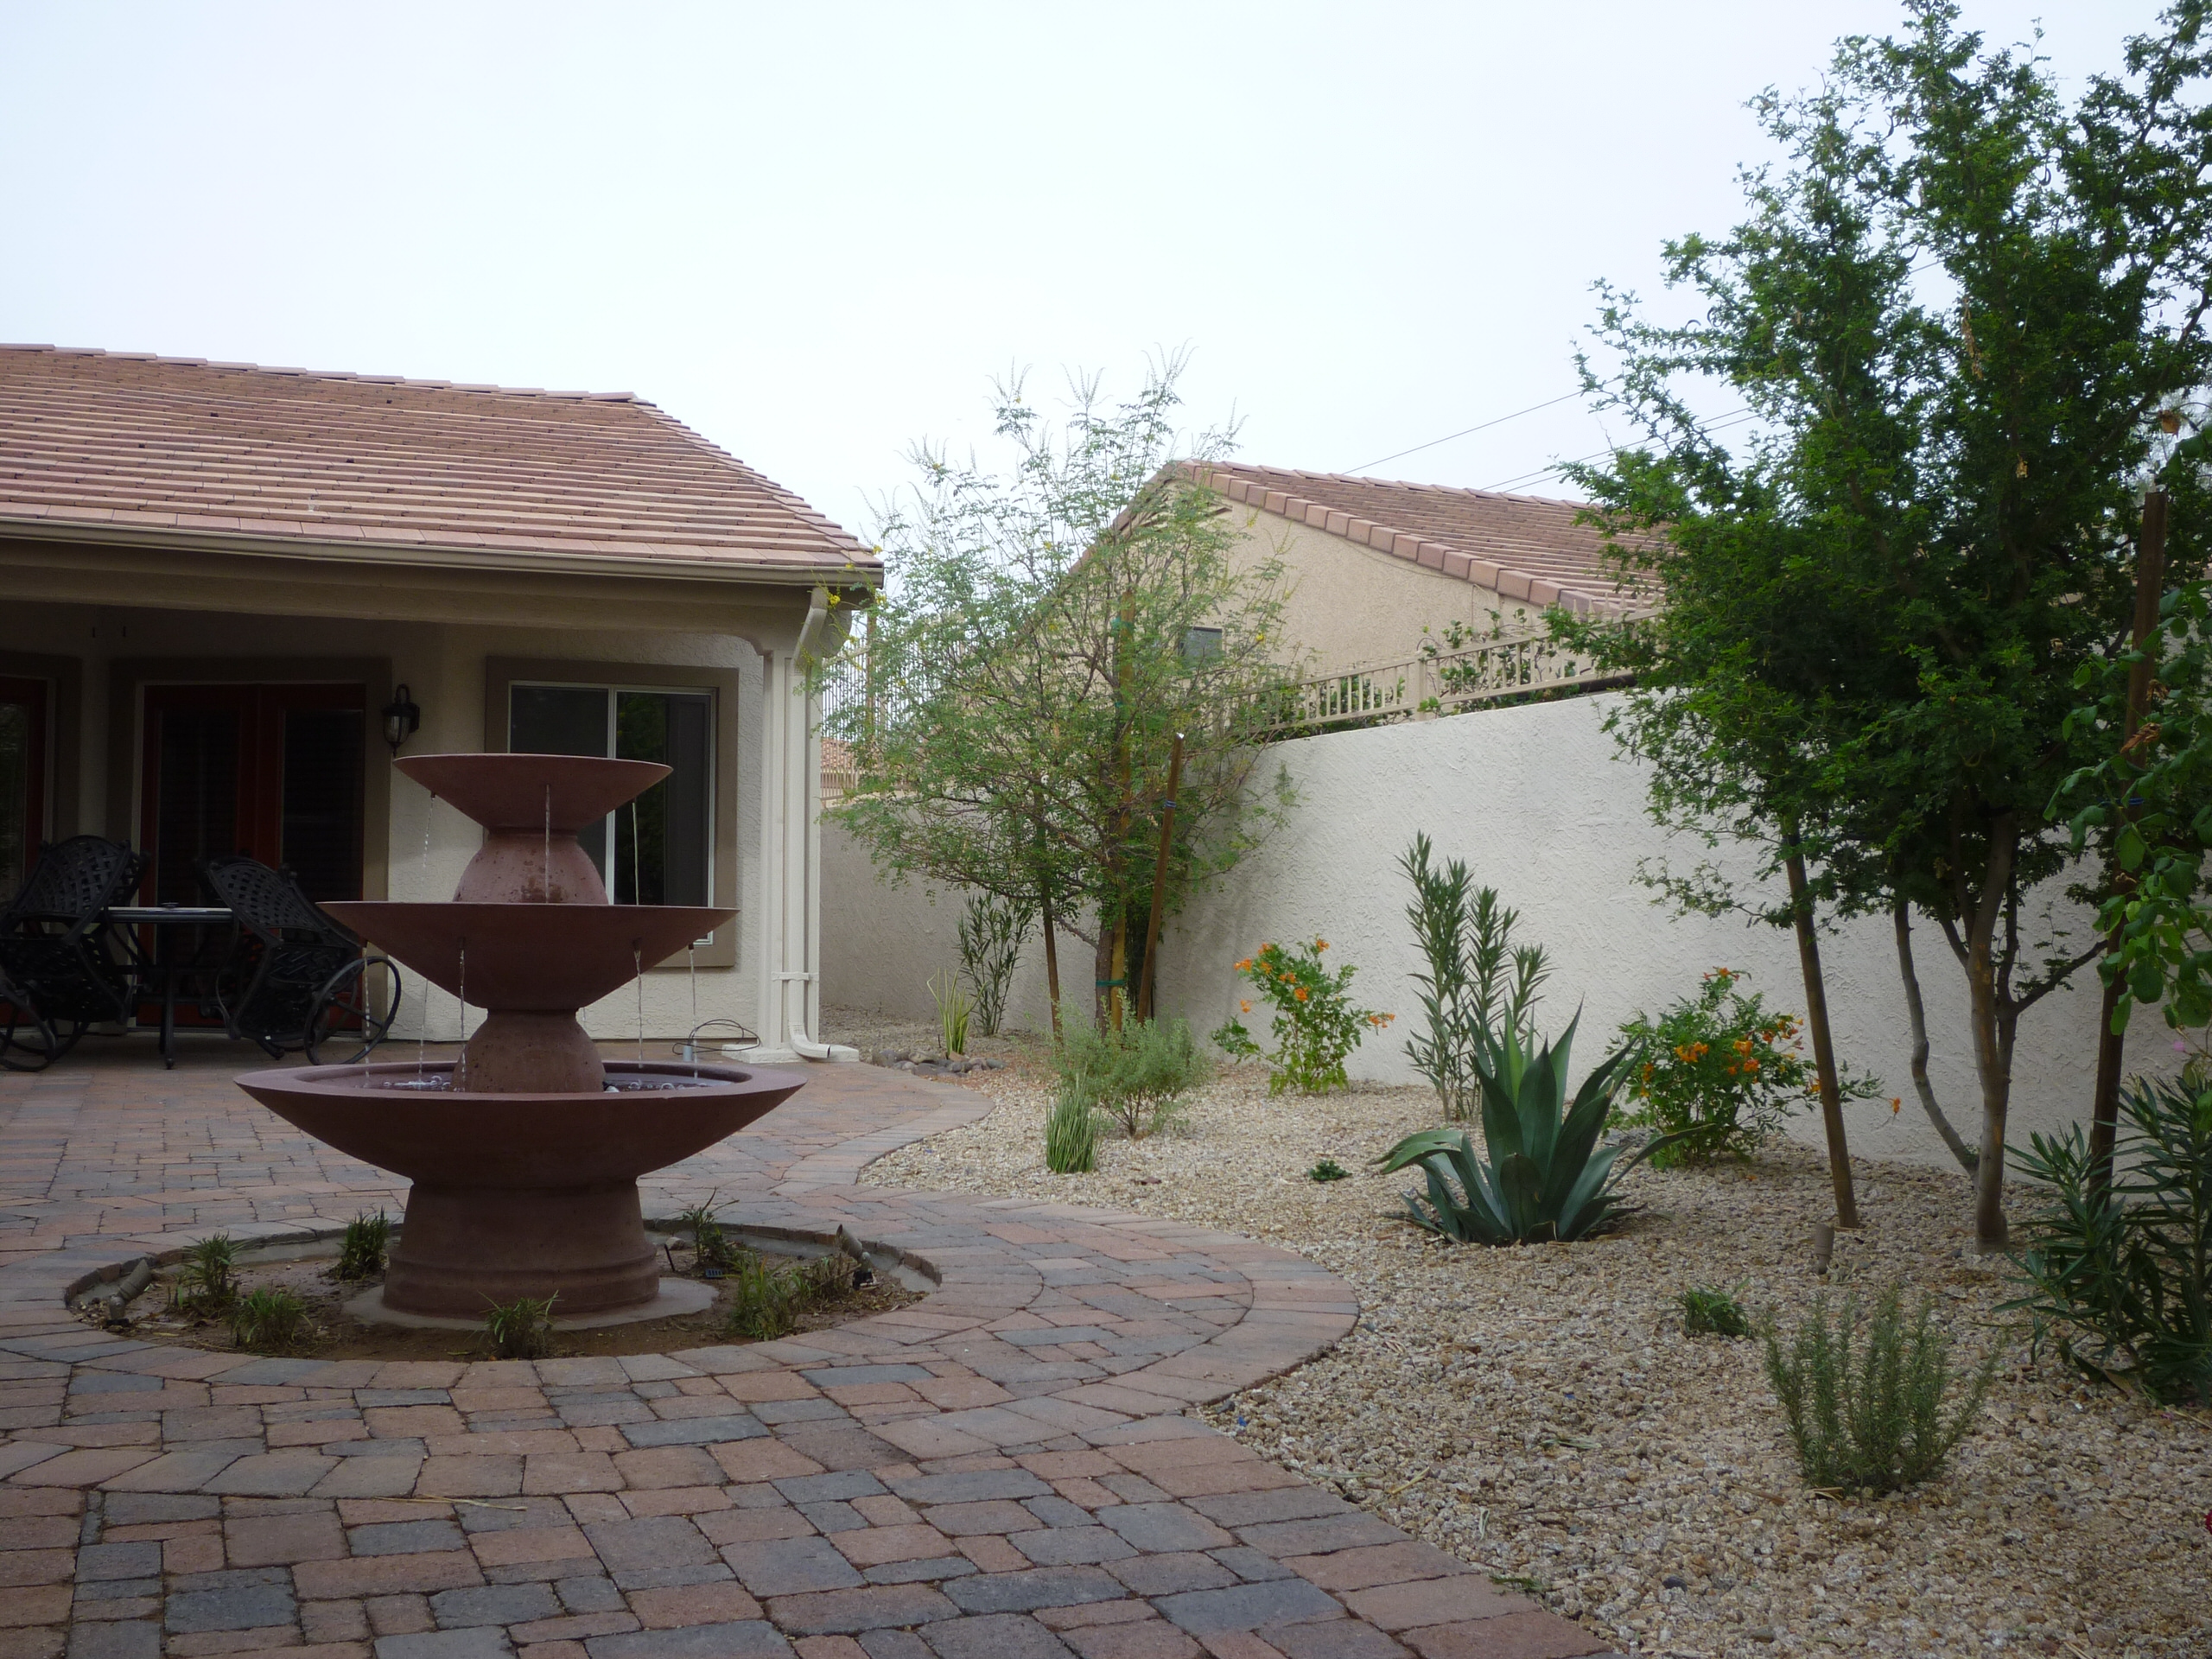 Entry Courtyard with Water Feature & Landscape